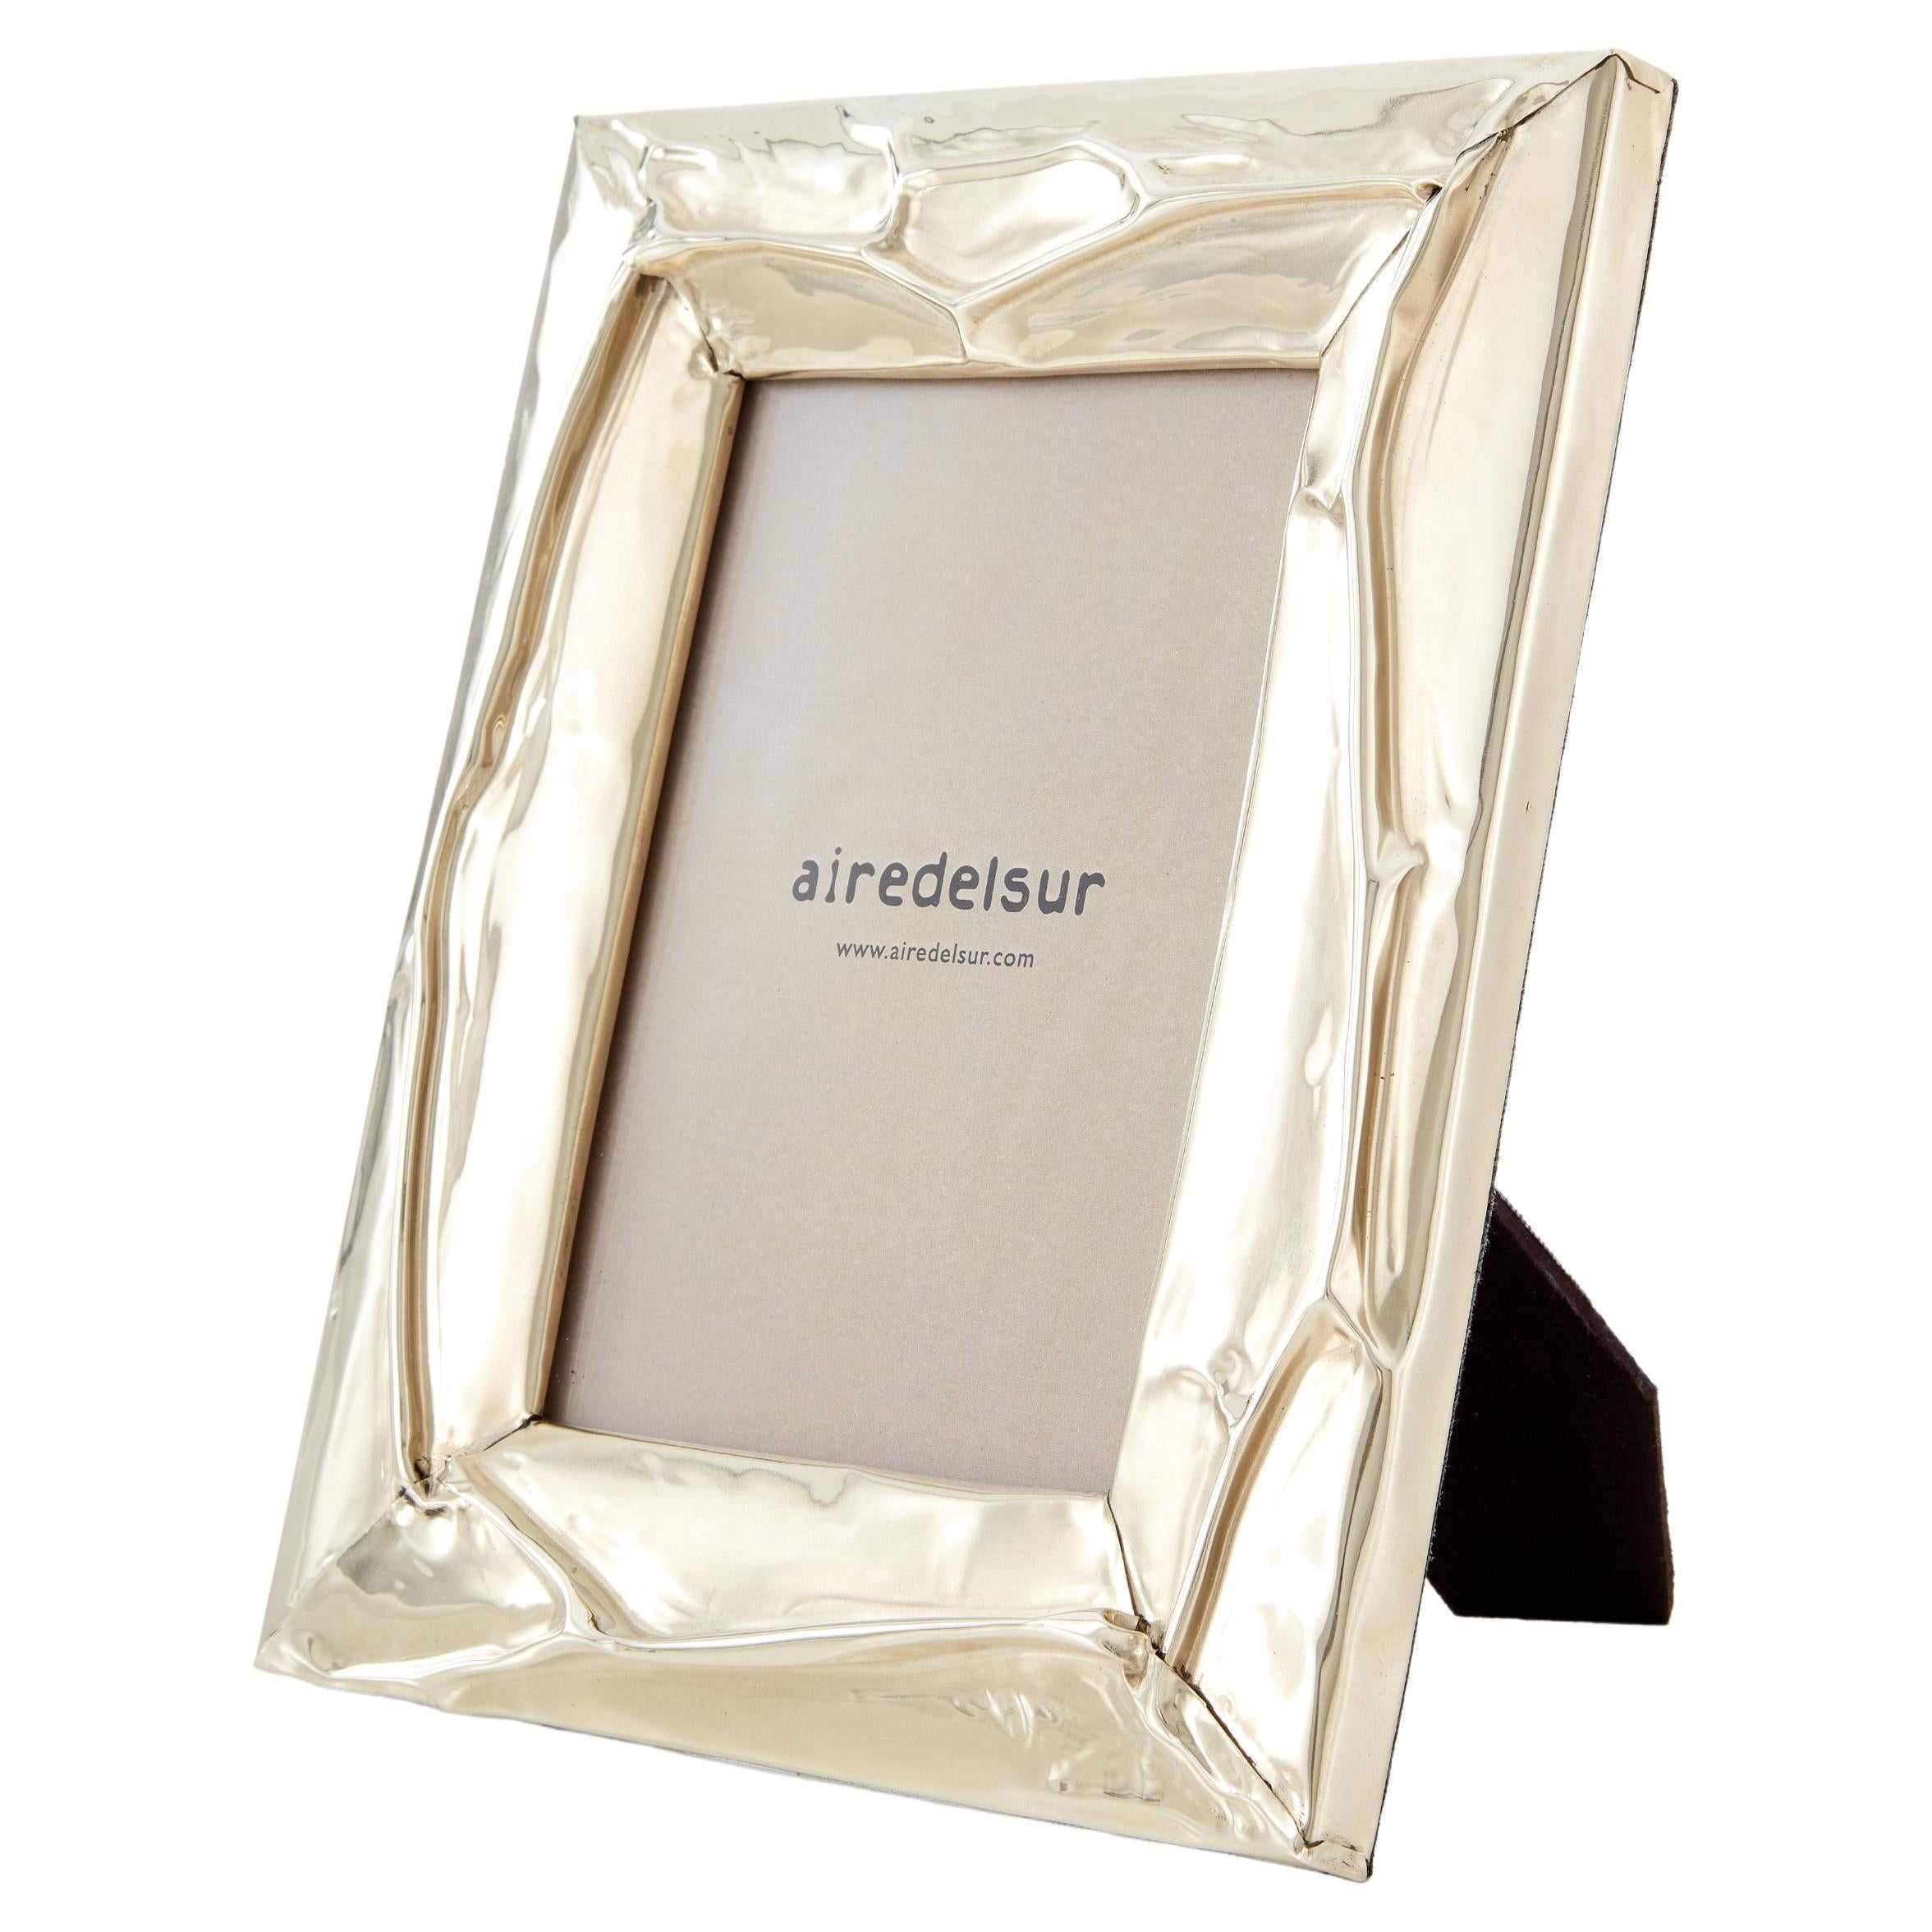 AIREDELSUR Picture Frames